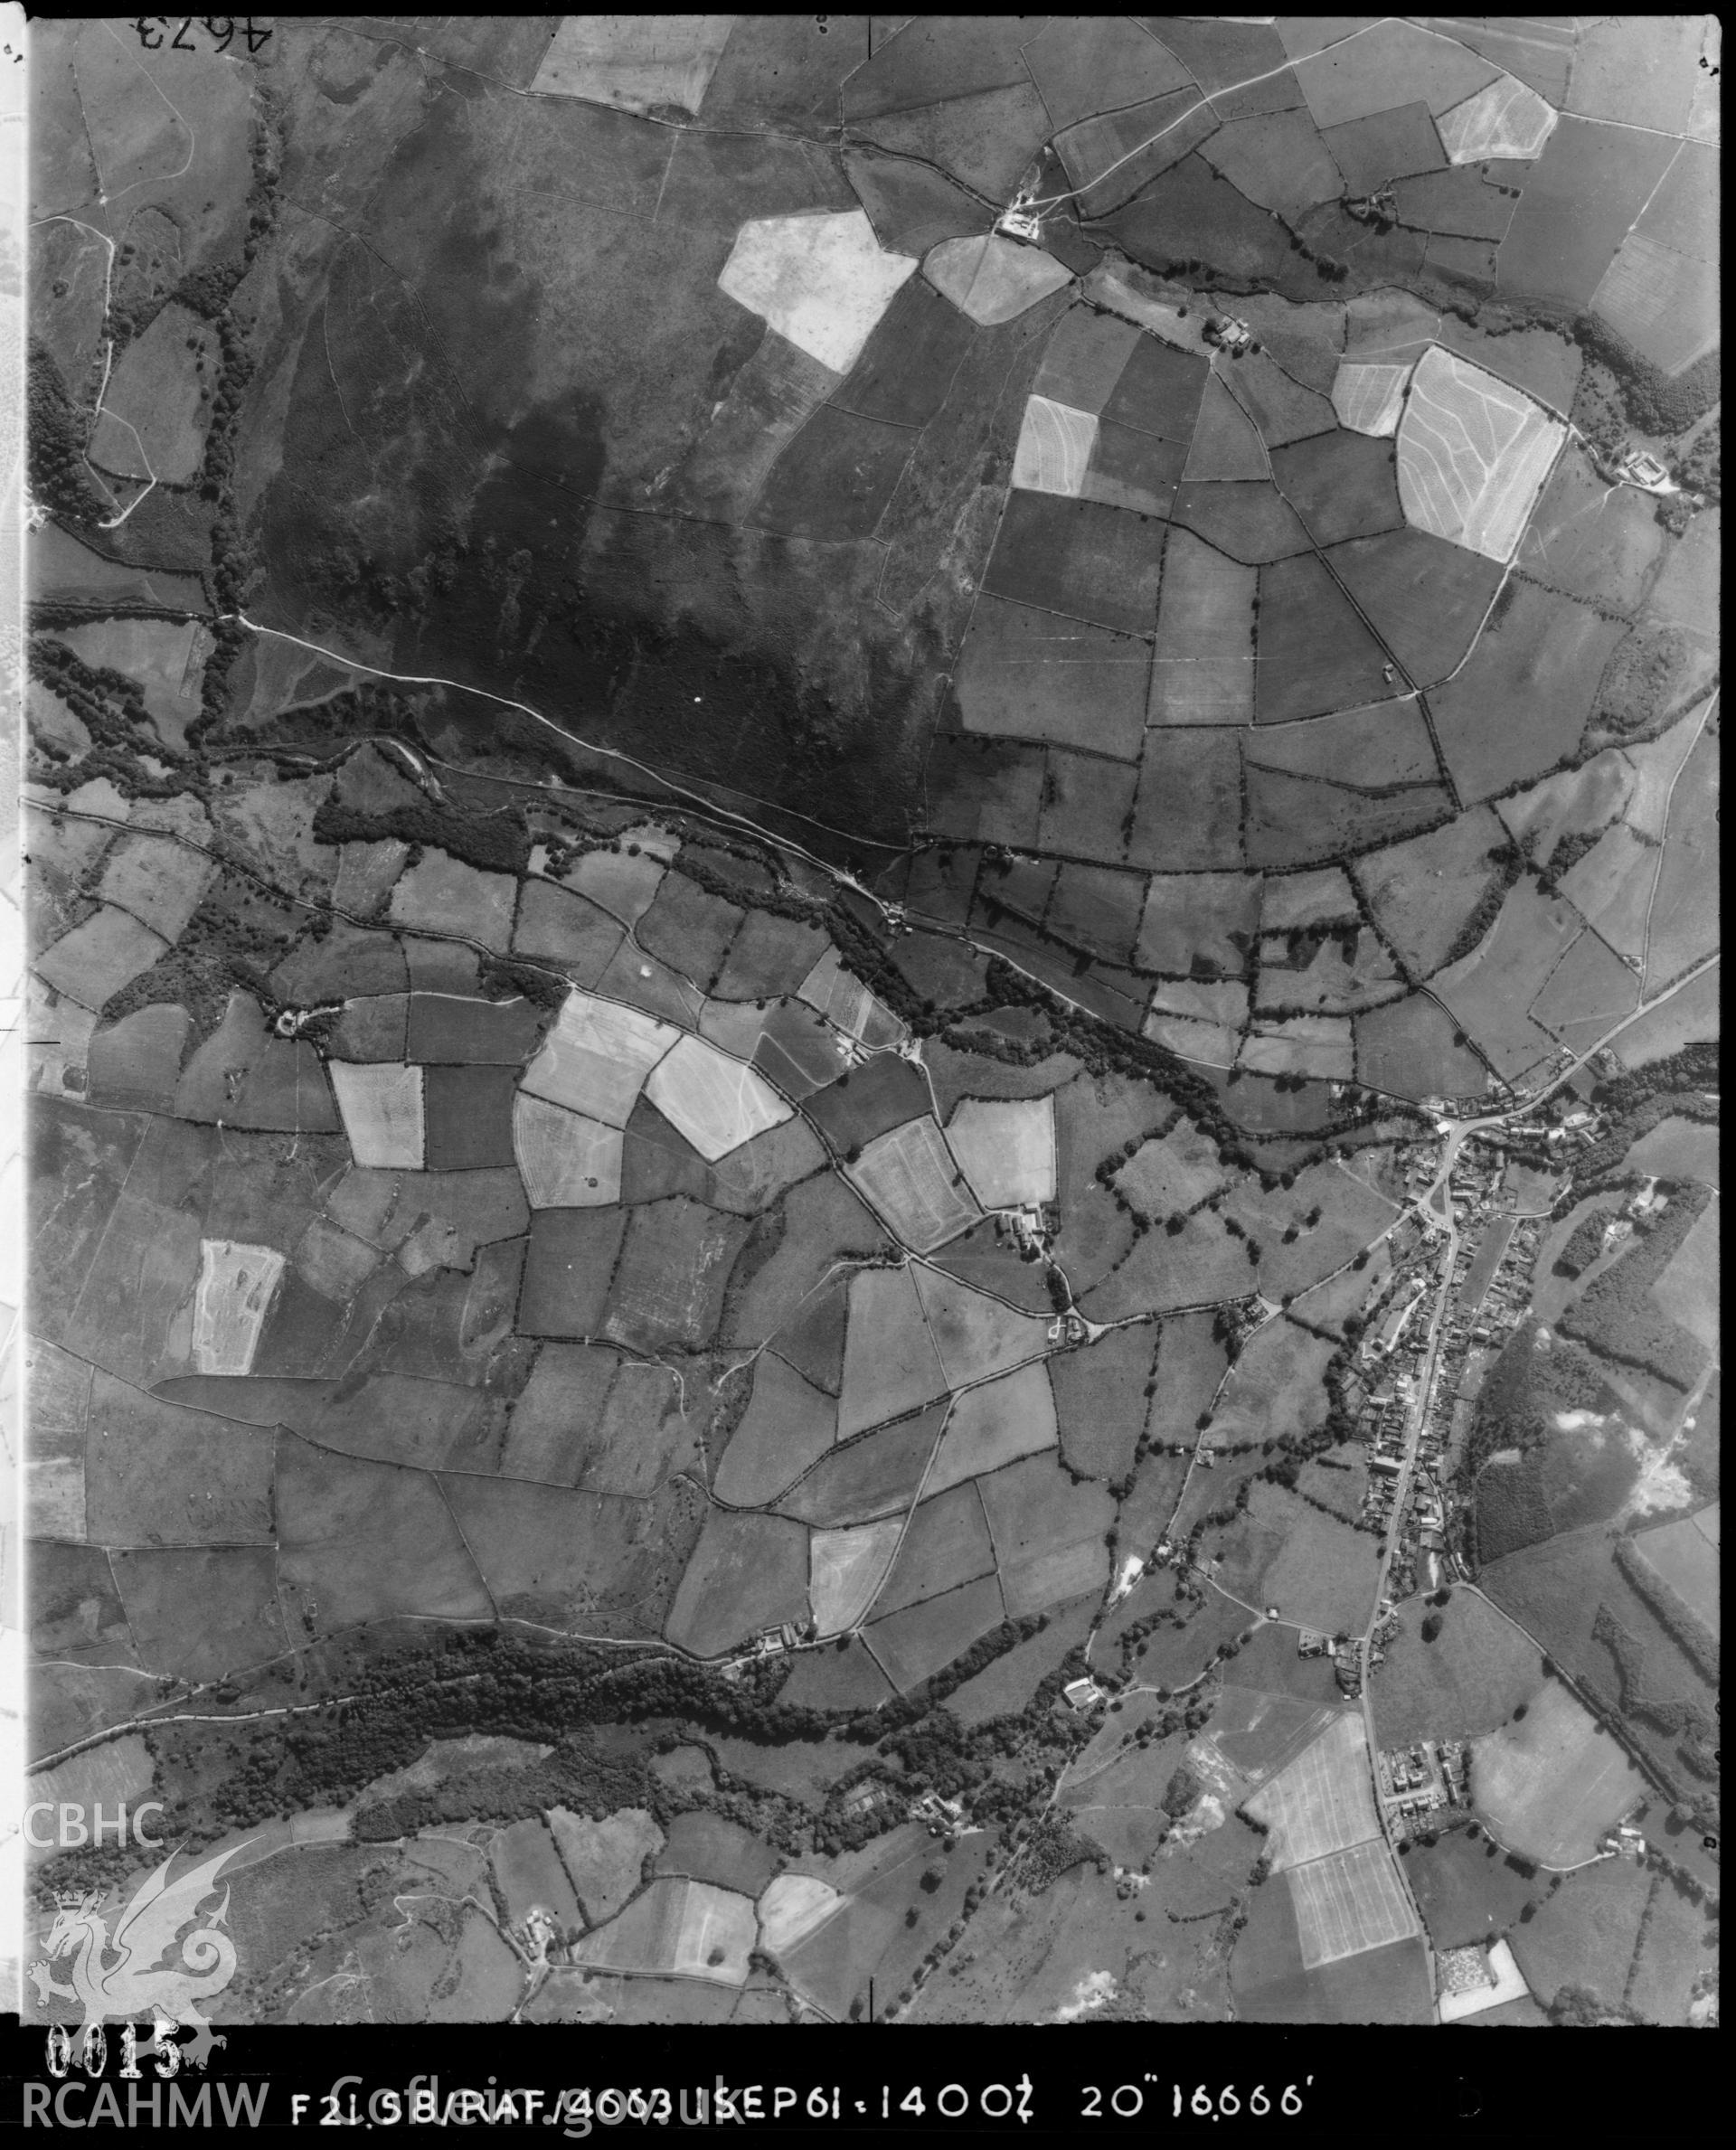 Black and white vertical aerial photograph of the Talybont area taken by the RAF in 1961.